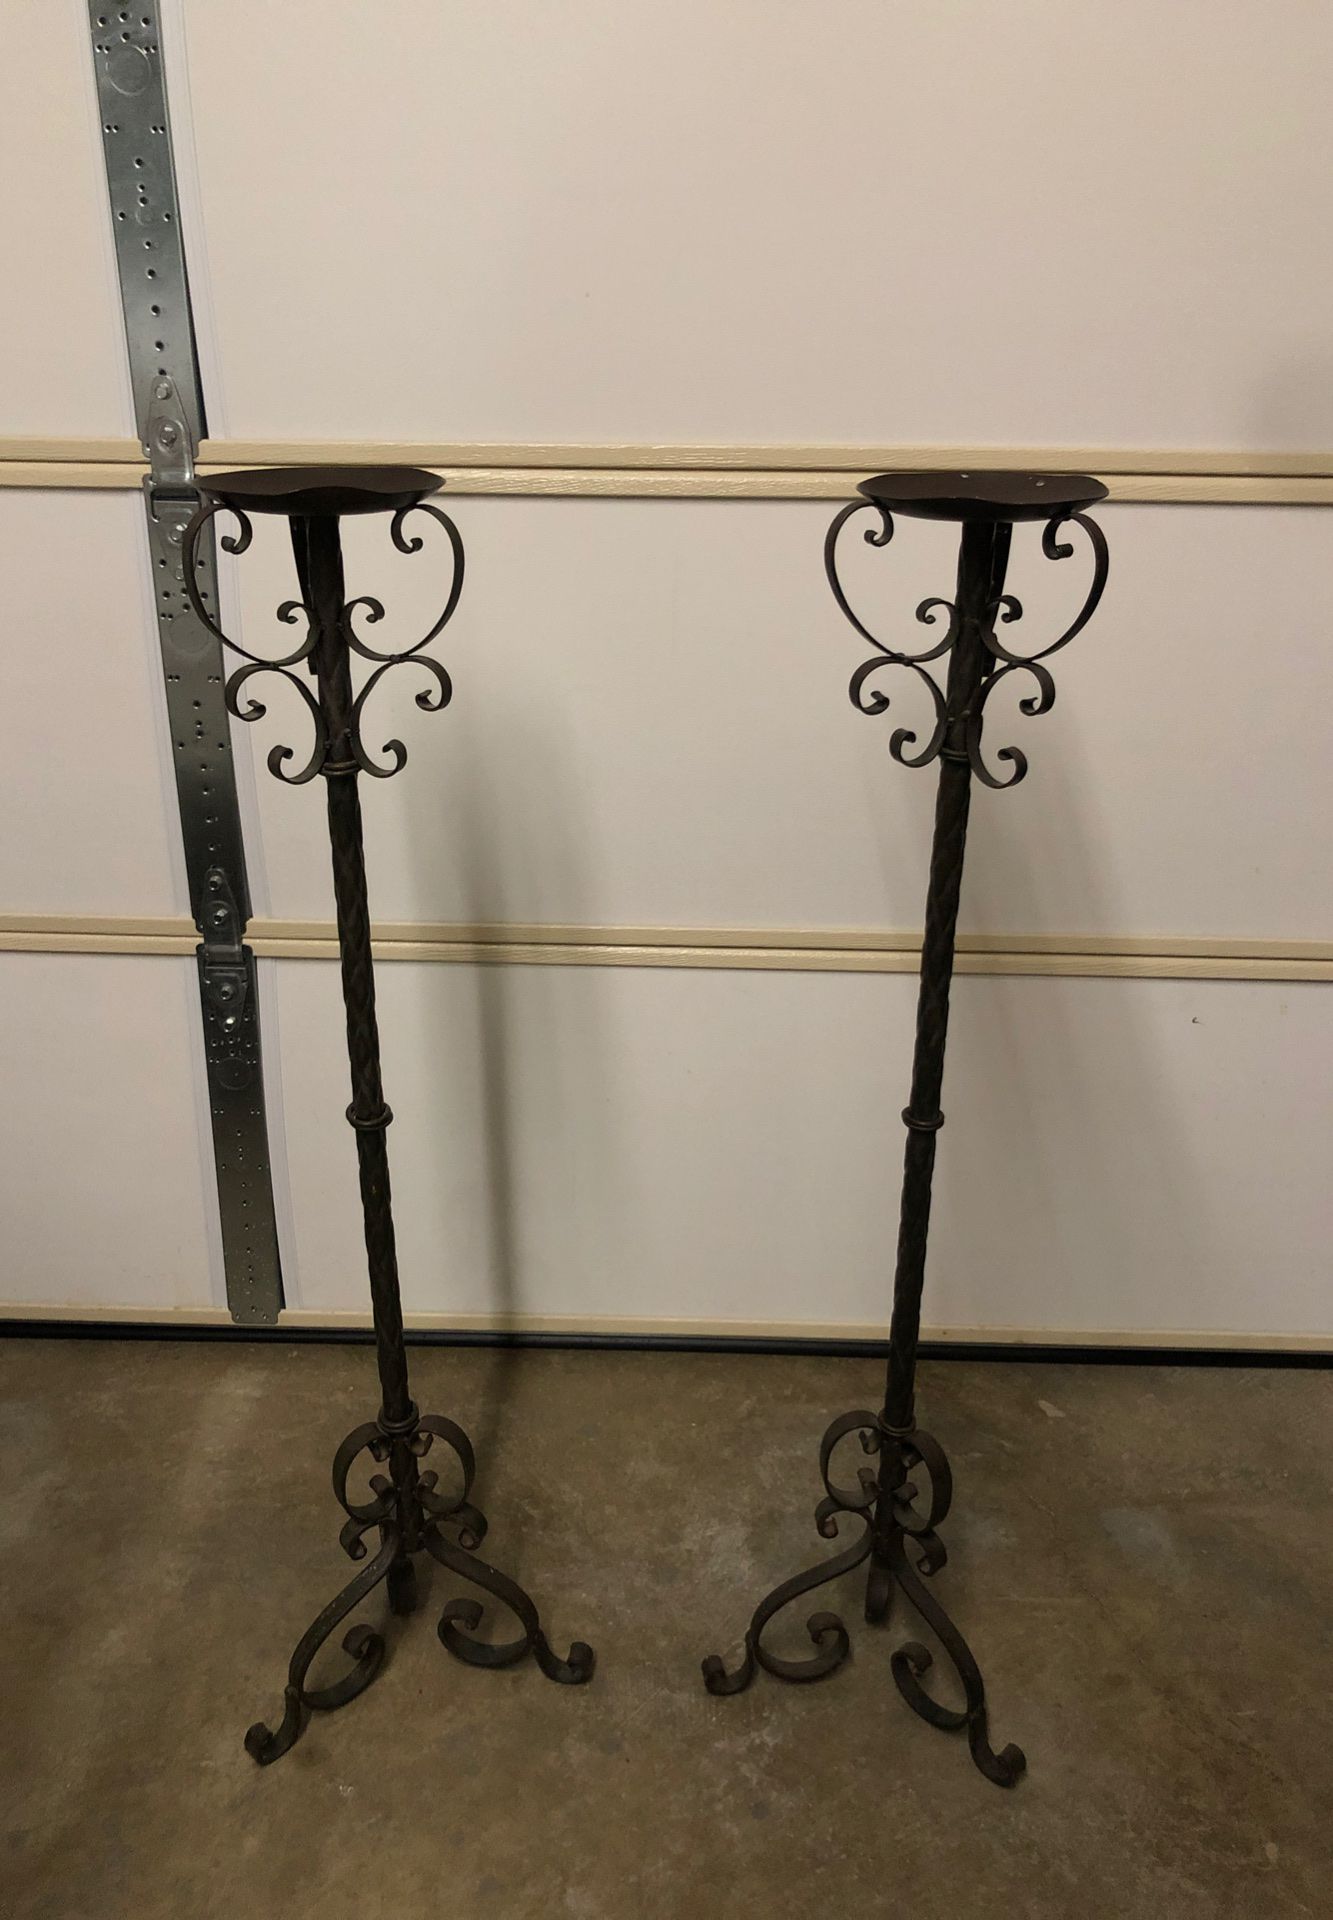 Set of 2 wrought iron candle holders